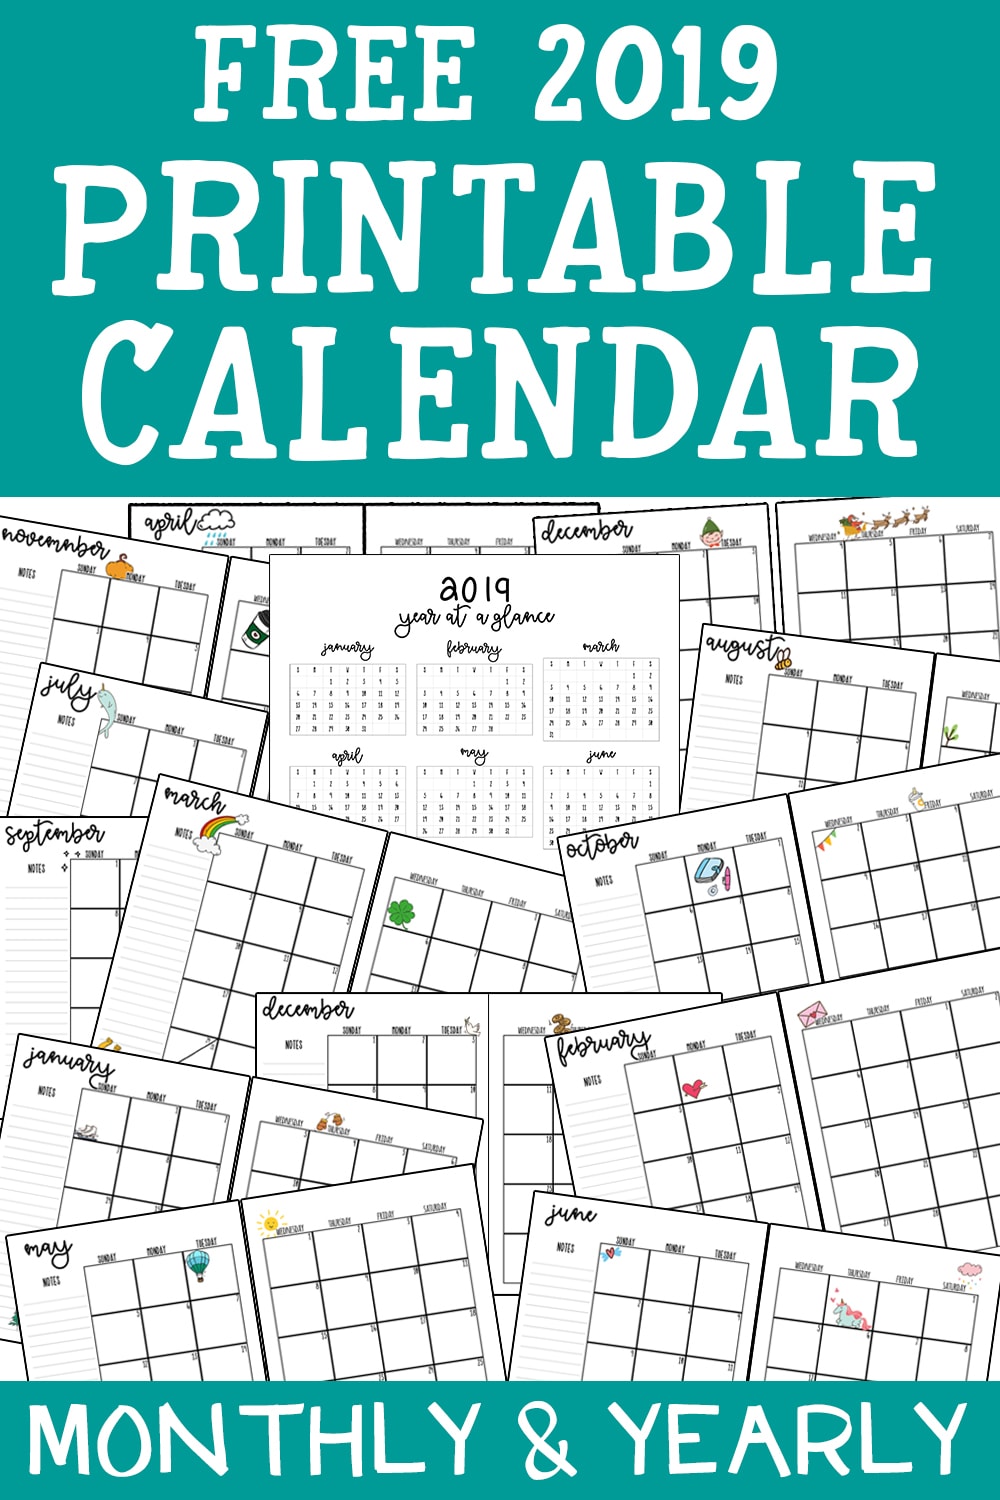 2019 Printable Calendar - Download this free printable monthly and yearly calendar for 2019. It can be printed for any size planner. There is a blank 2019 monthly calendar and one with embellishments available. #planner #planneraddict #calendar